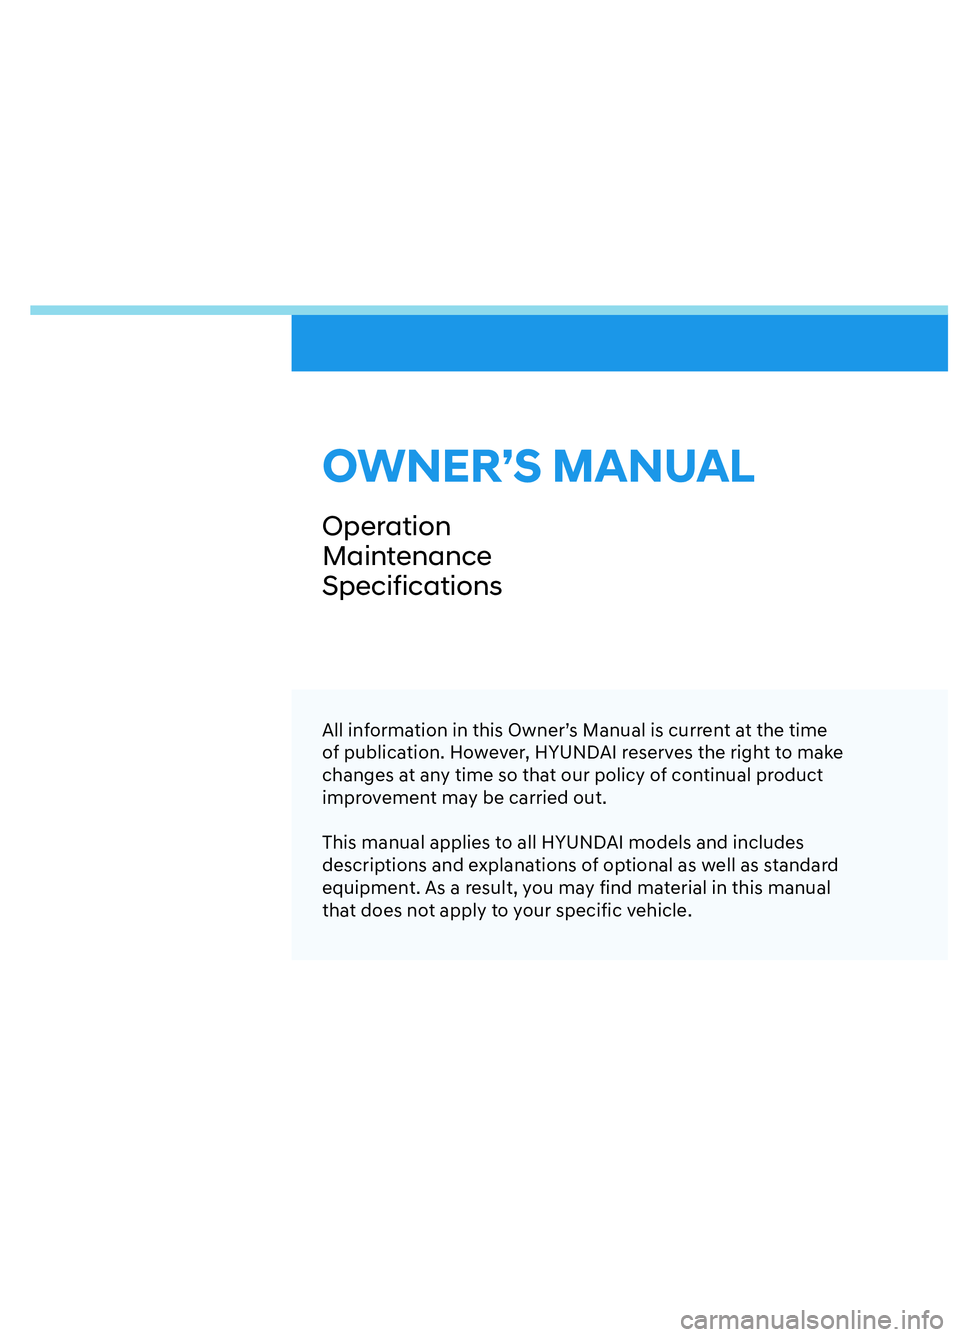 HYUNDAI ELANTRA N 2022  Owners Manual OWNER’S MANUAL
Operation
Maintenance
Specifications
All information in this Owner’s Manual is current at the time 
of publication. However, HYUNDAI reserves the right to make 
changes at any time 